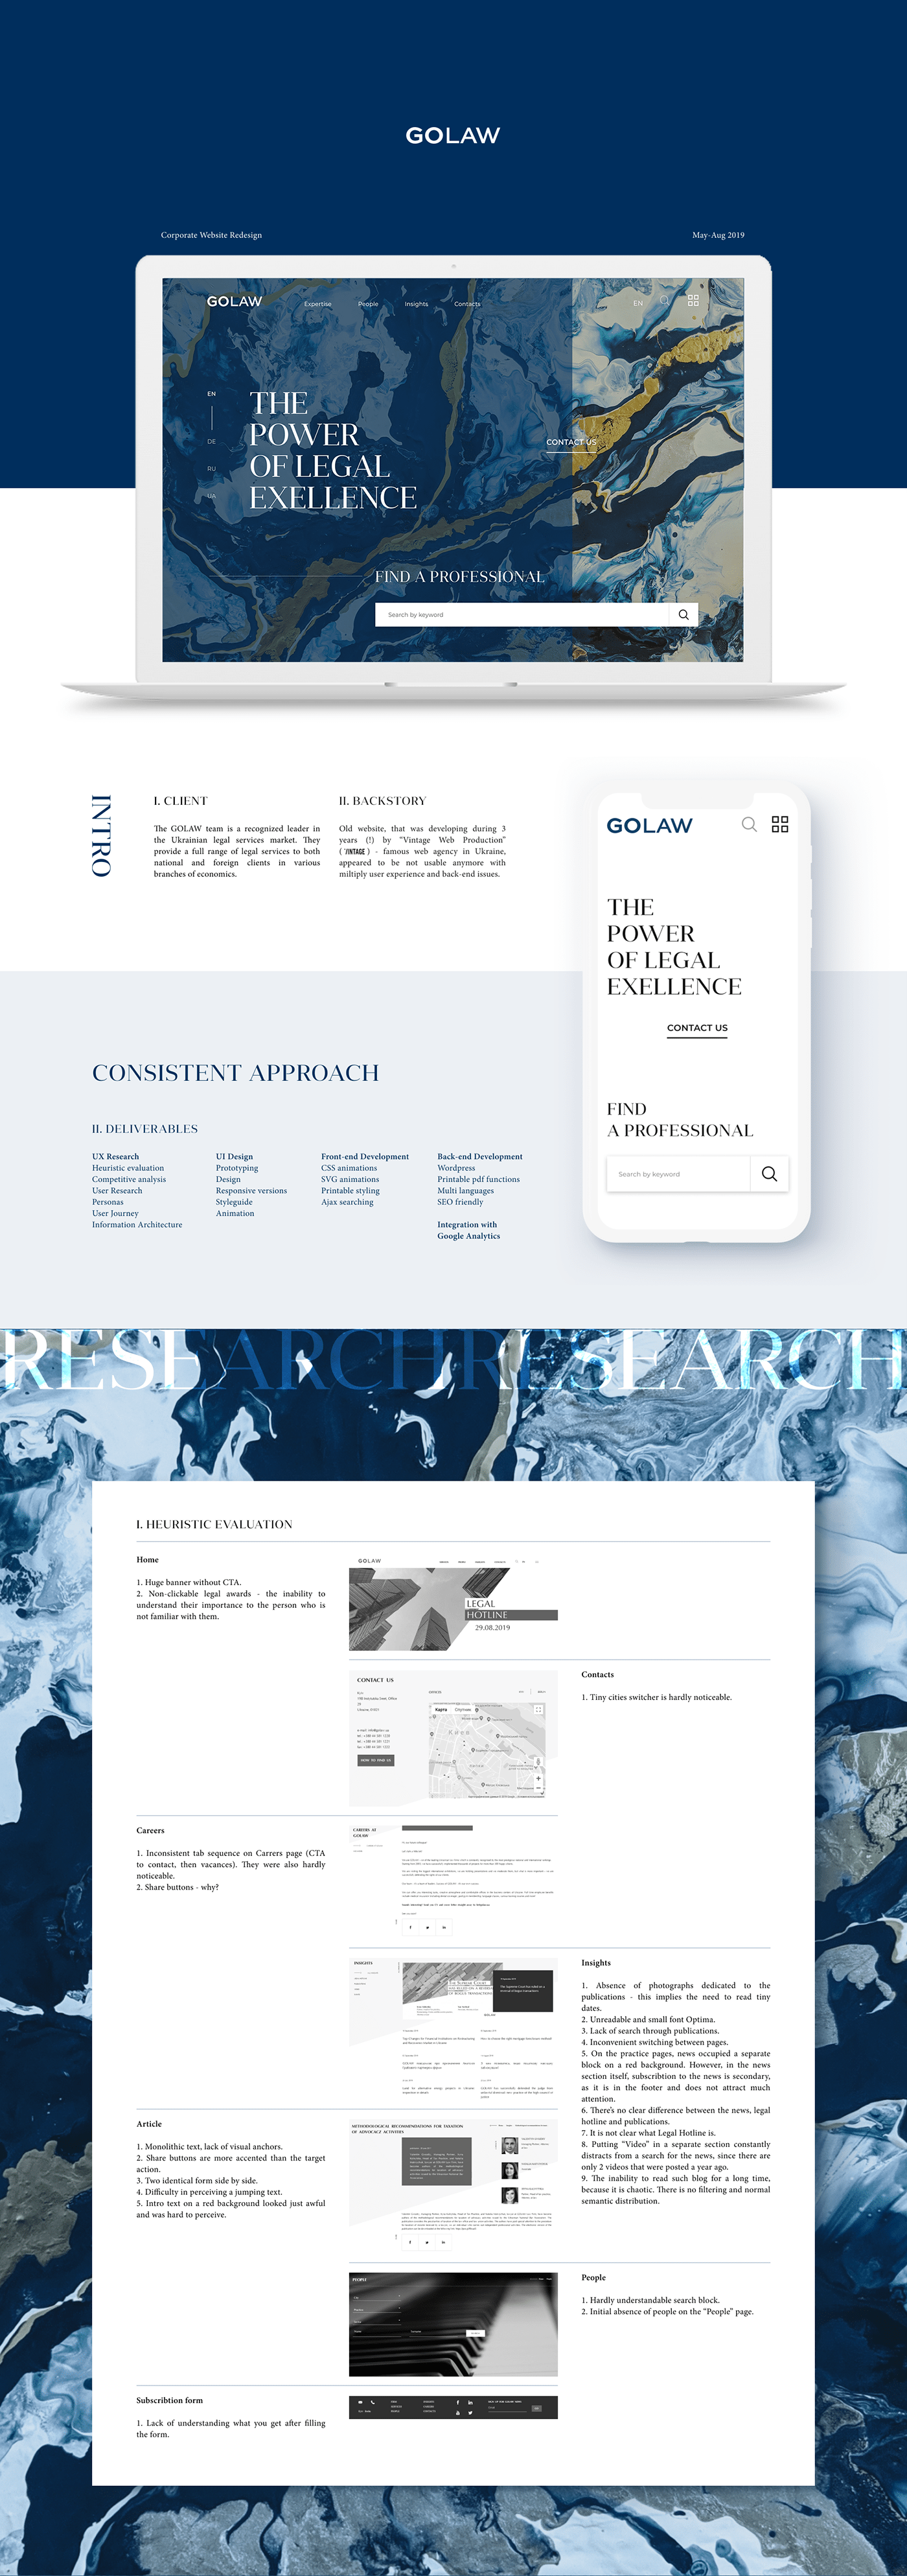 legal assistance legal lawyer corporate business website from scratch Responsive law UI/UX minimalist